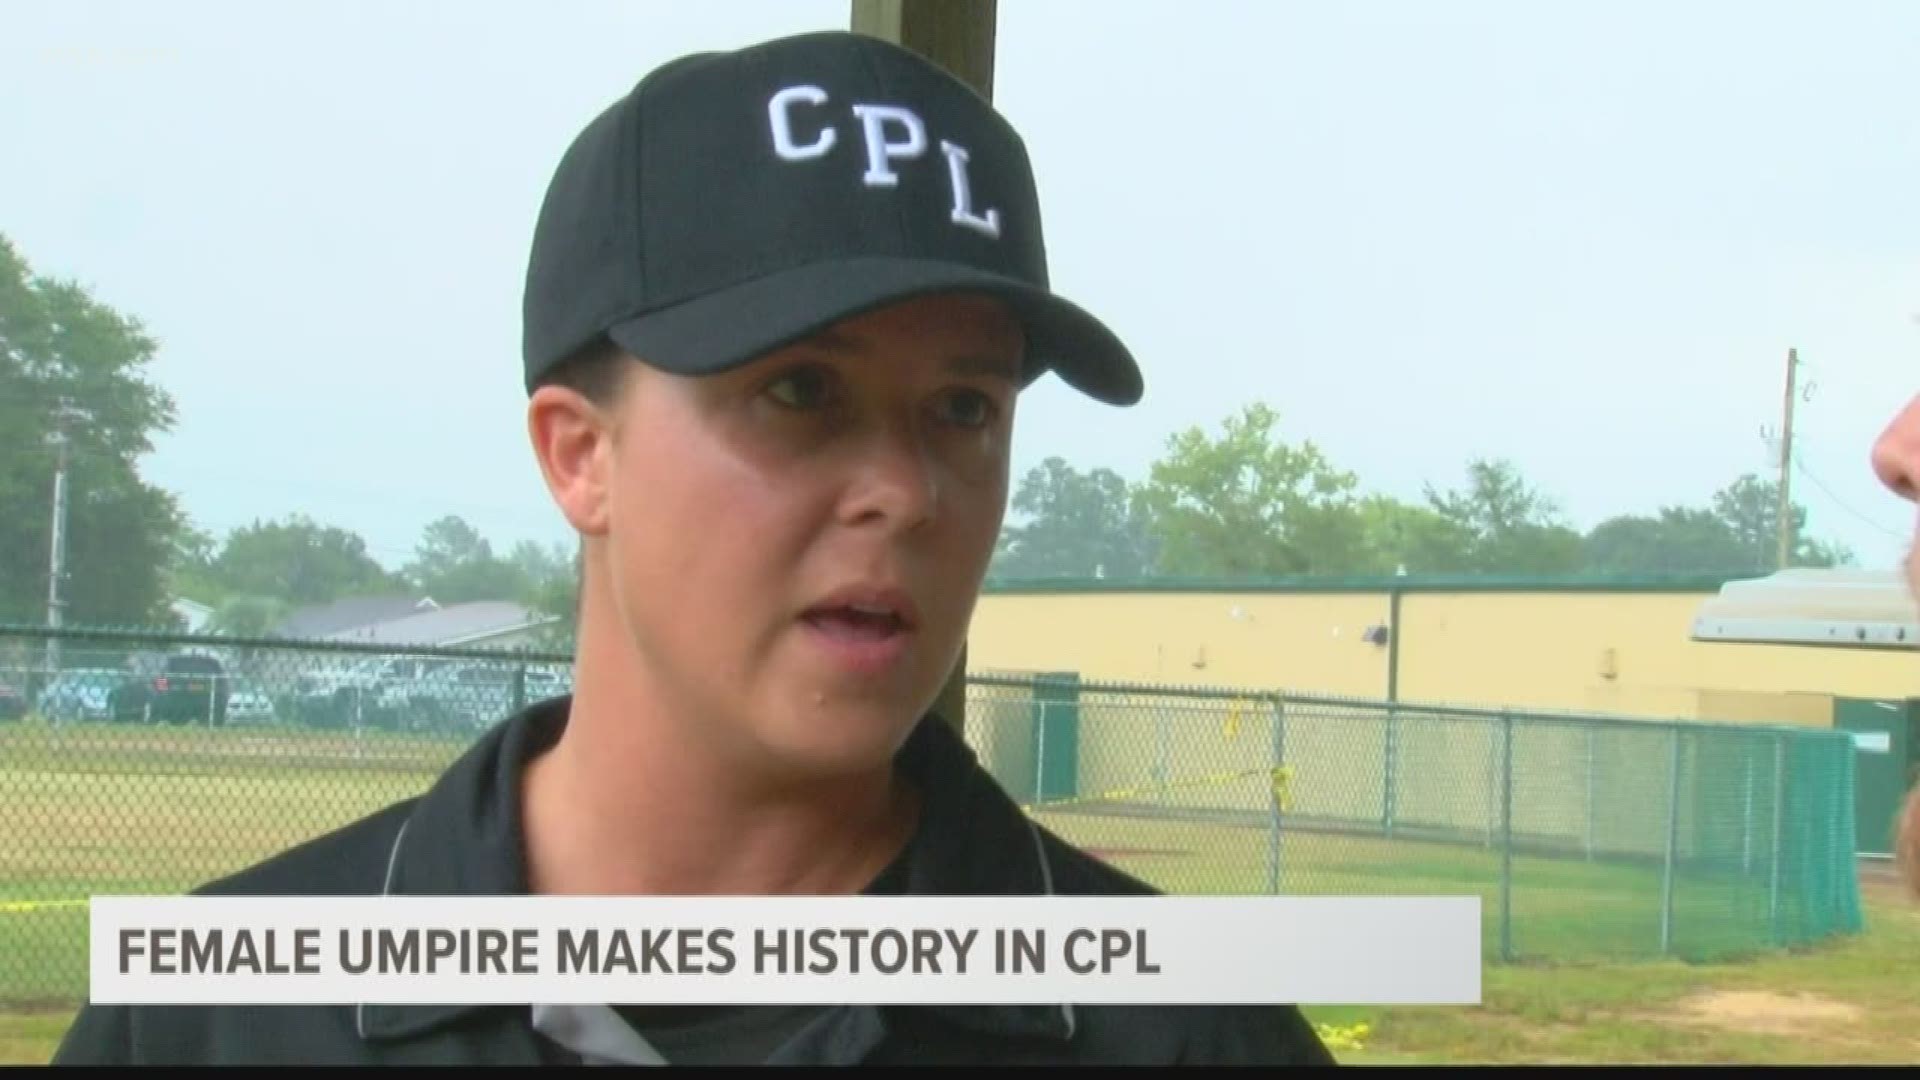 Greta Langhenry is the first female umpire in the history of the Coastal Plain League. She worked Thursday's game between the Lexington County Blowfish and the Macon Bacon.